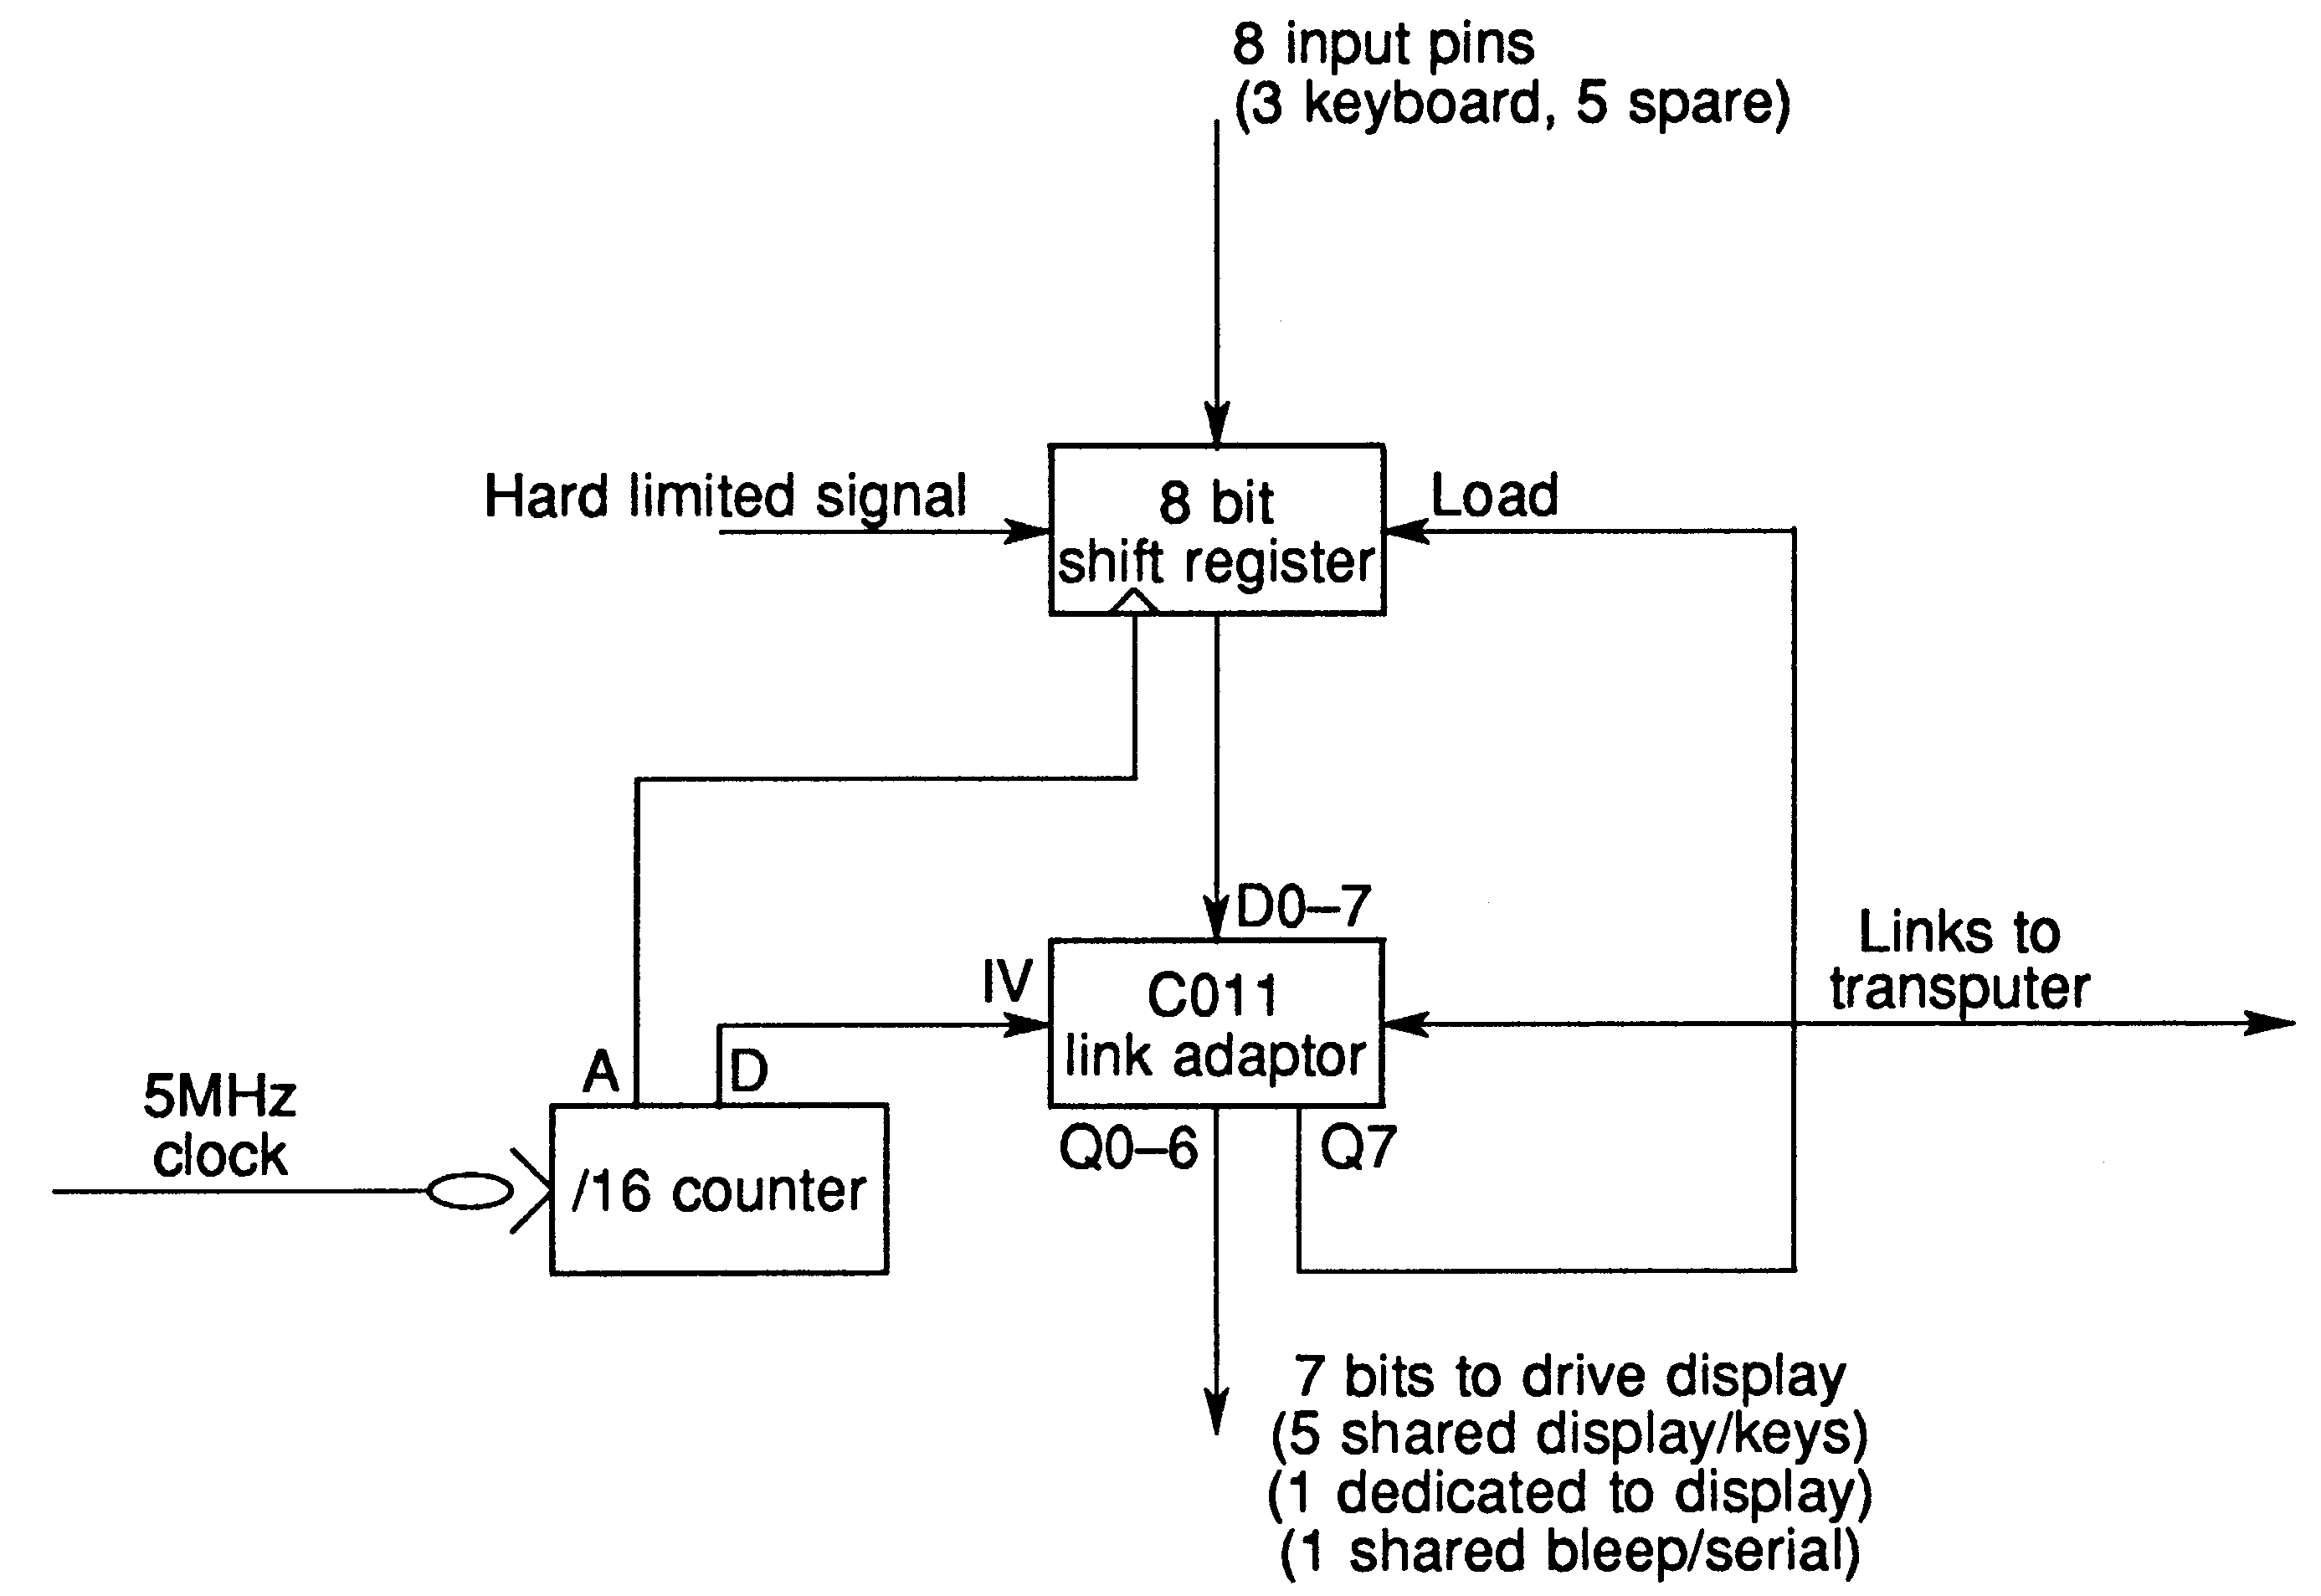 Interface for 2.5MHz
hard-limited samples